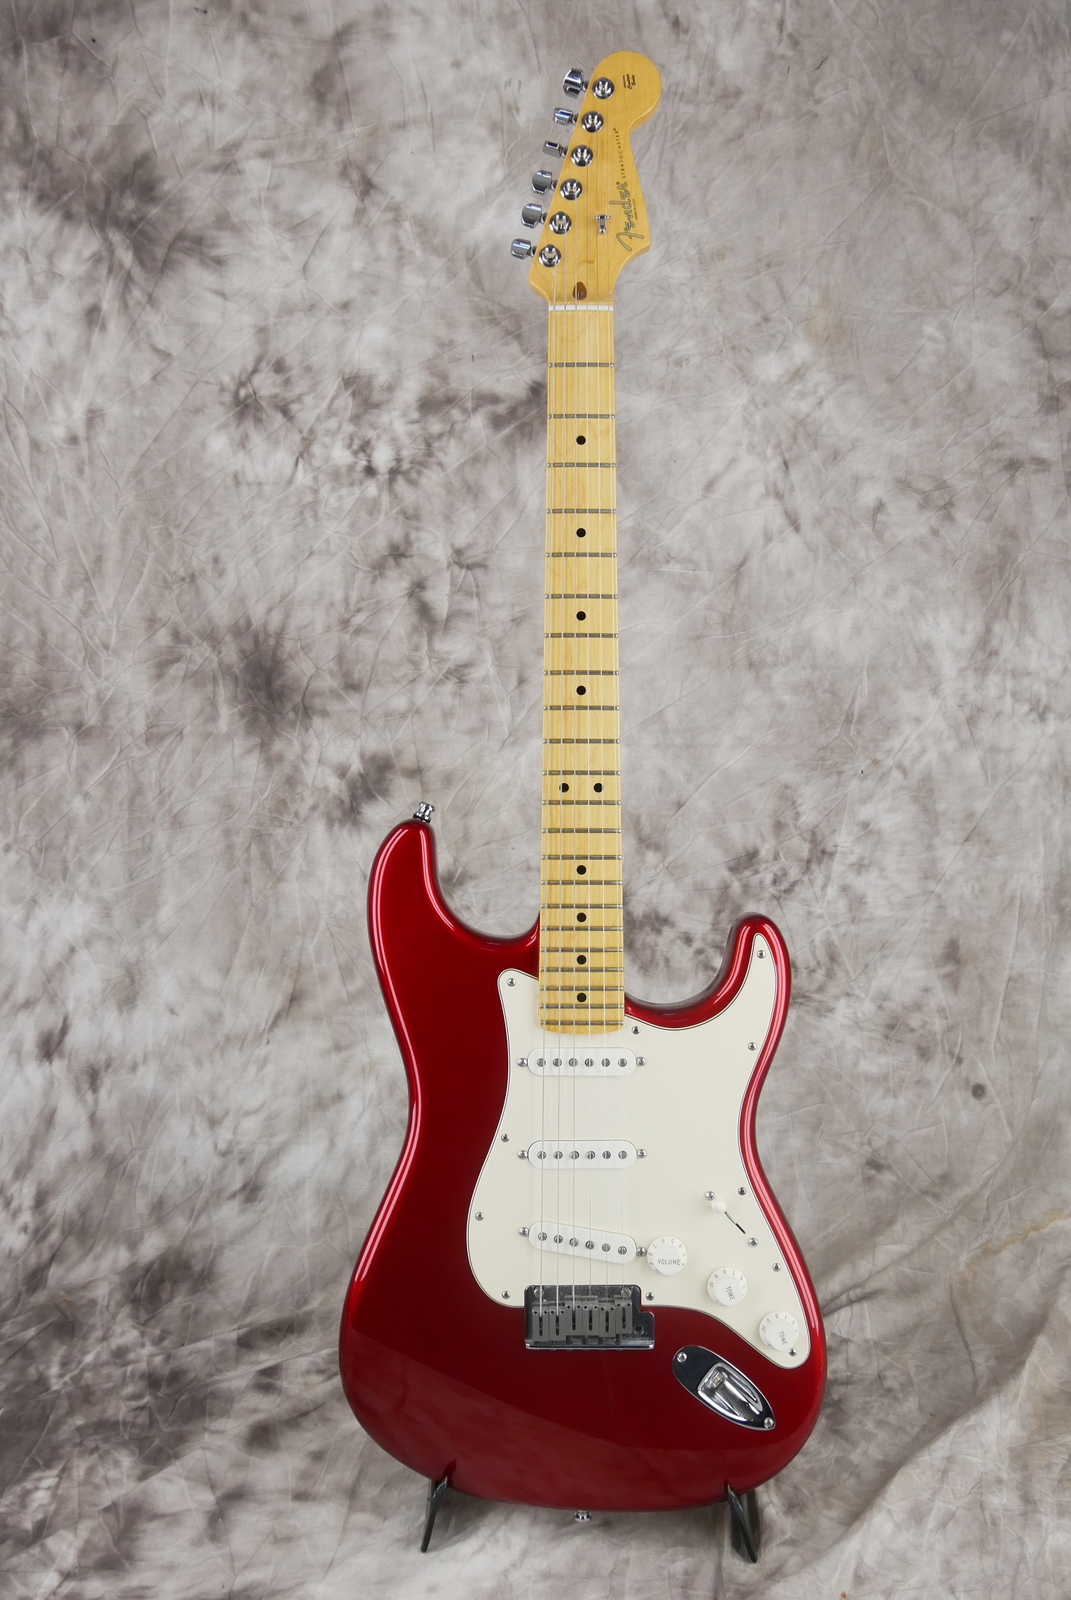 img/vintage/5279/Fender_Stratocaster_USA_built_from_parts_candy_apple_red_2015-001.JPG